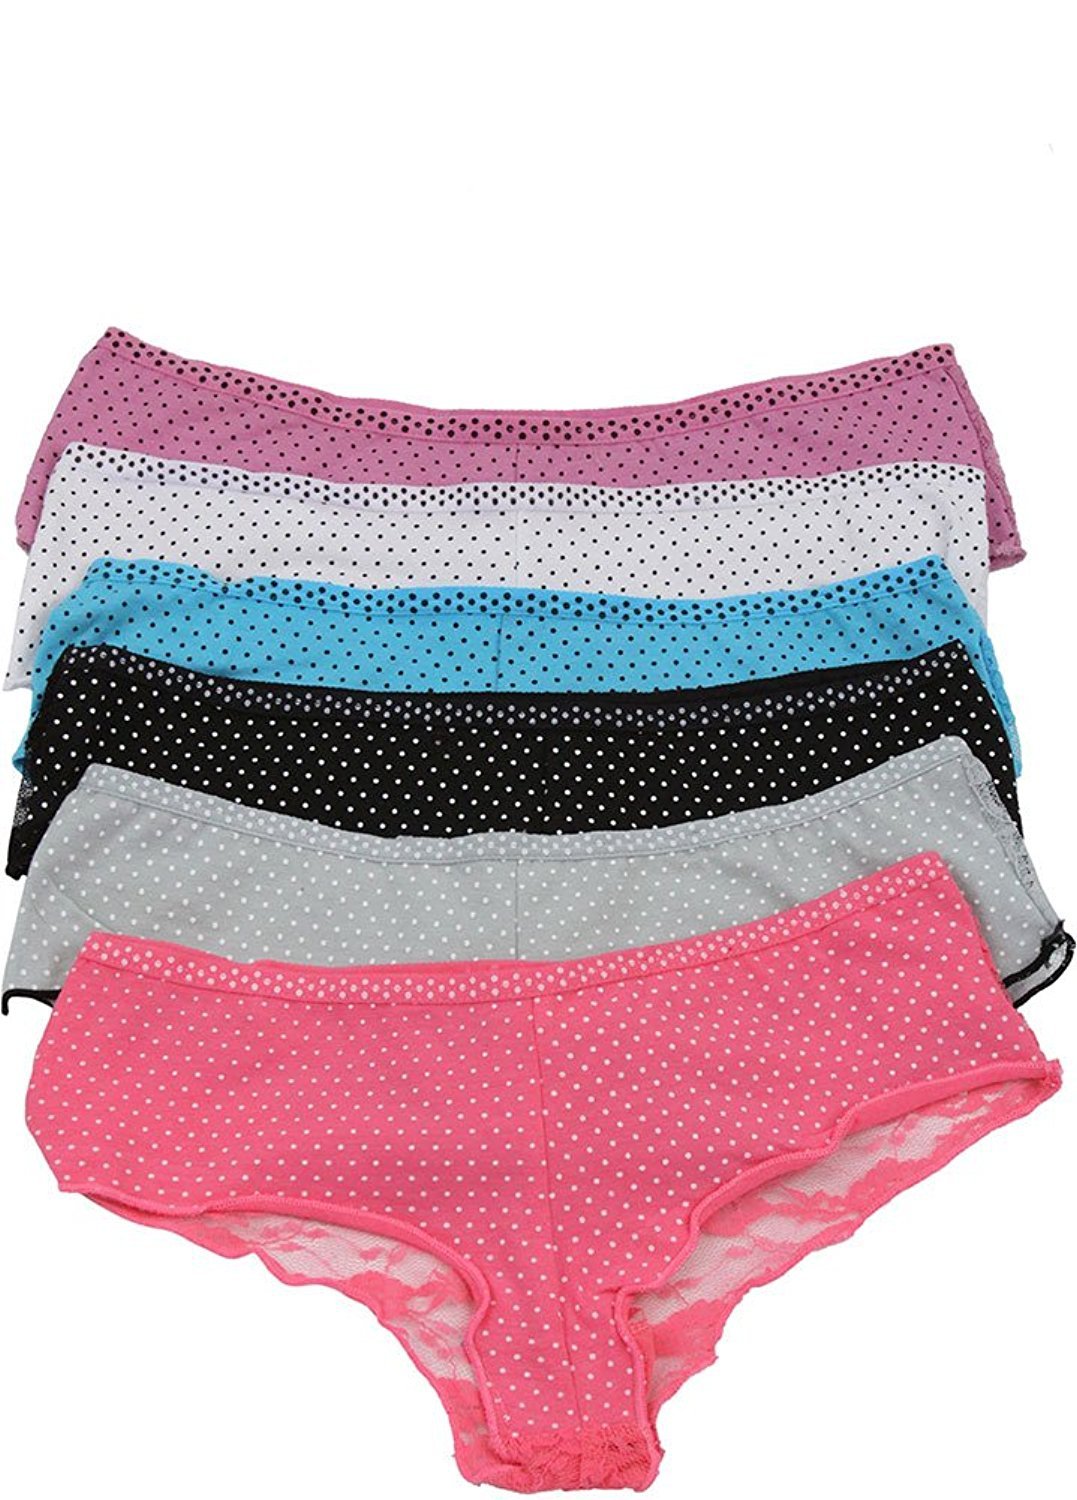 Tobeinstyle Women S Pack Of 6 Polka Dot Panties With Lace Back Ebay